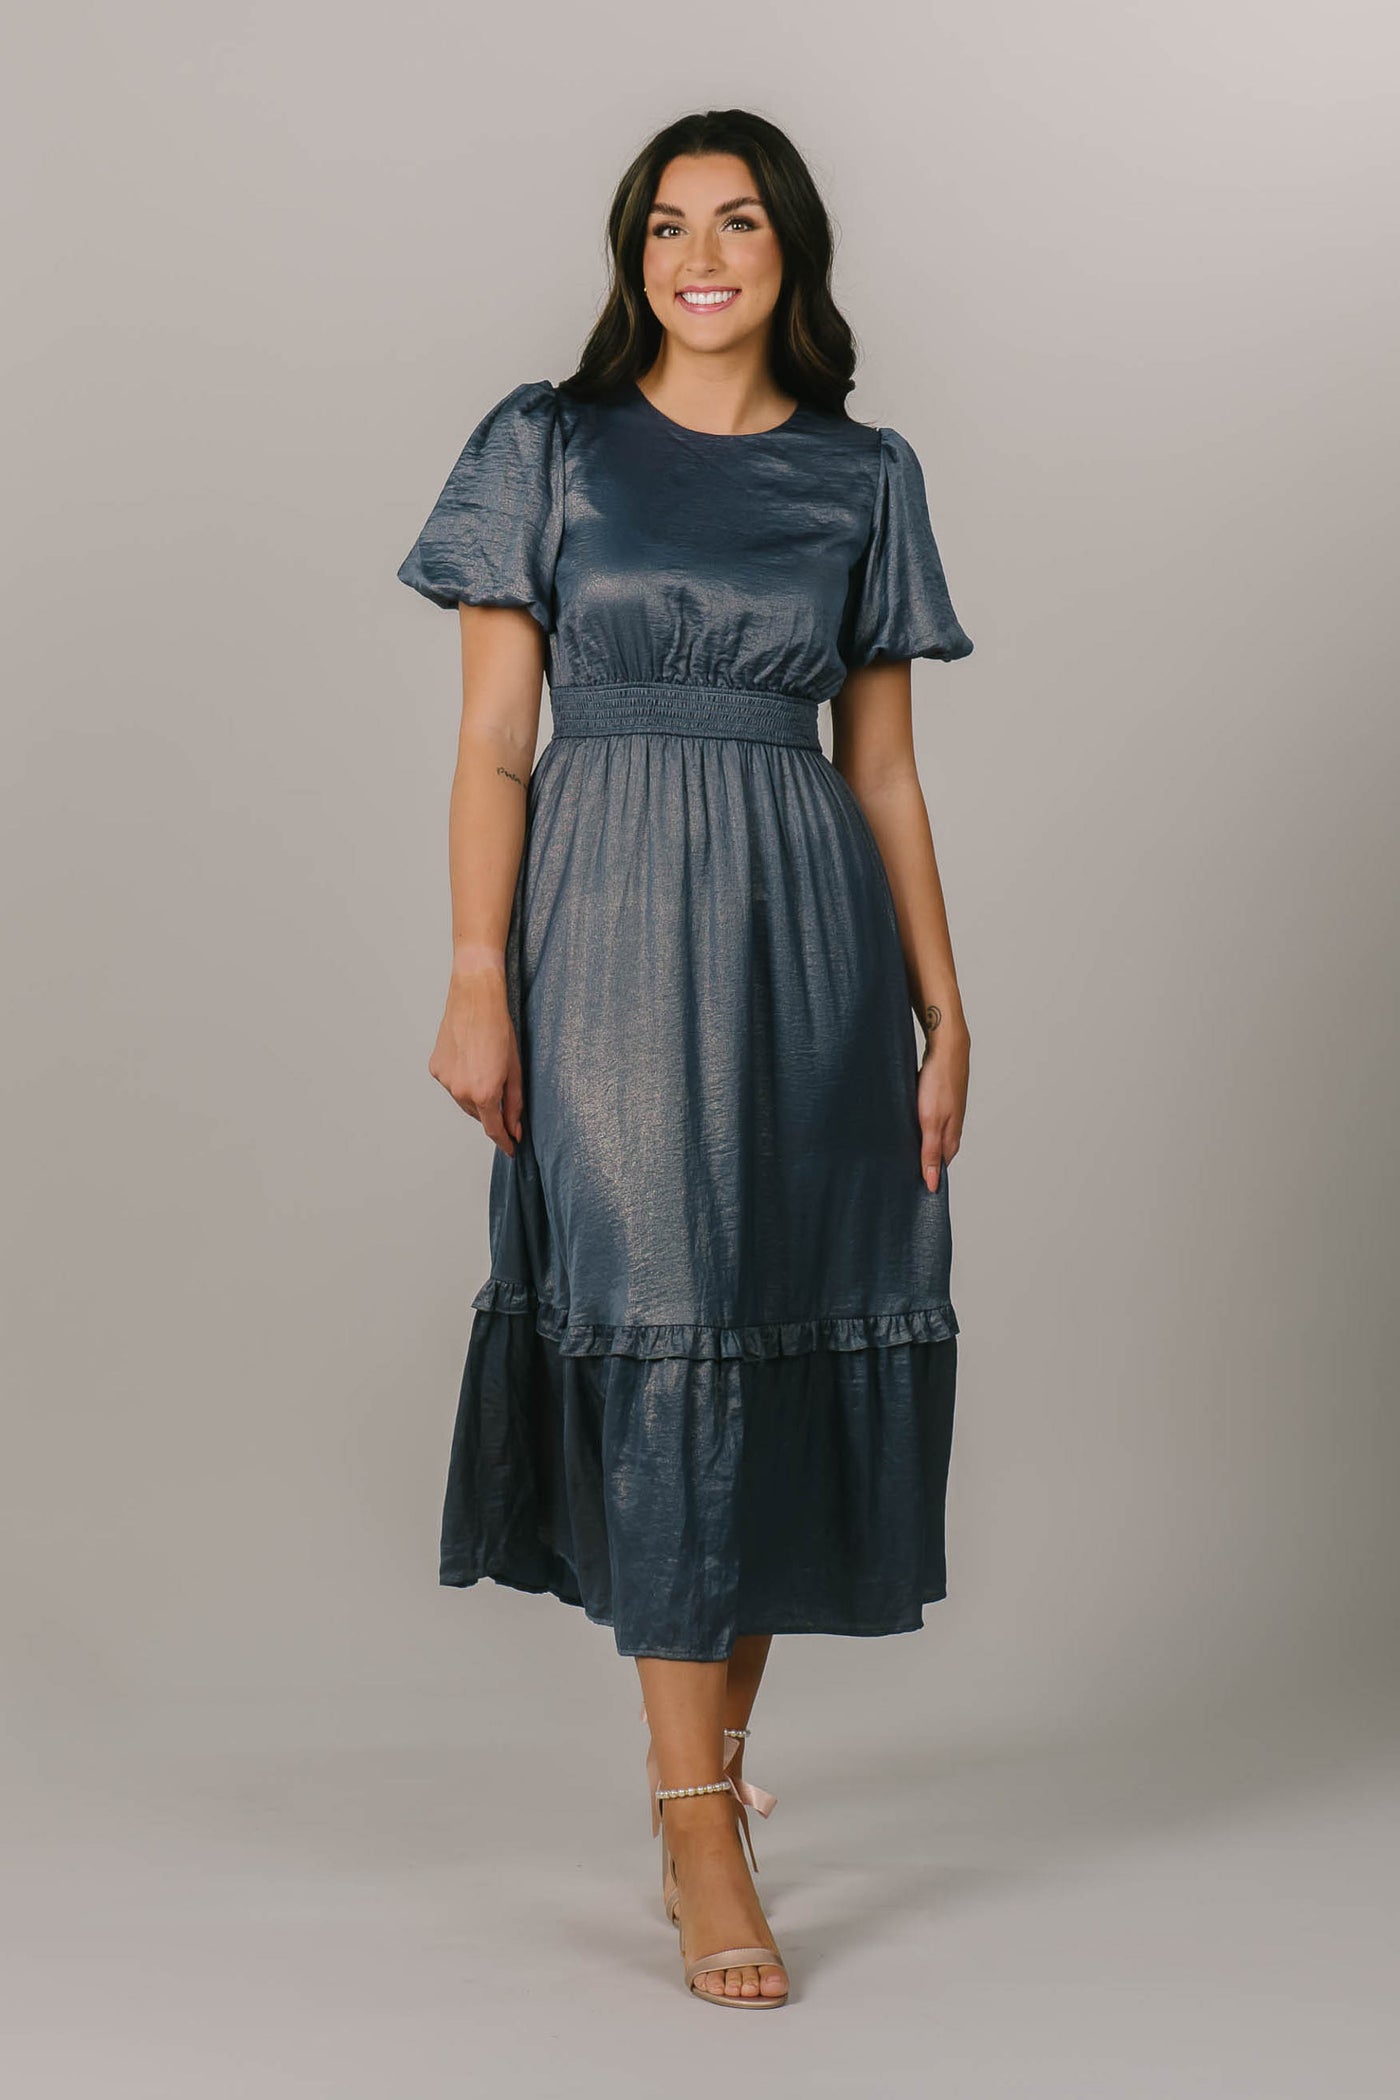 This is a modest bridesmaid dress with a blue shimmery fabric and defined waistline.